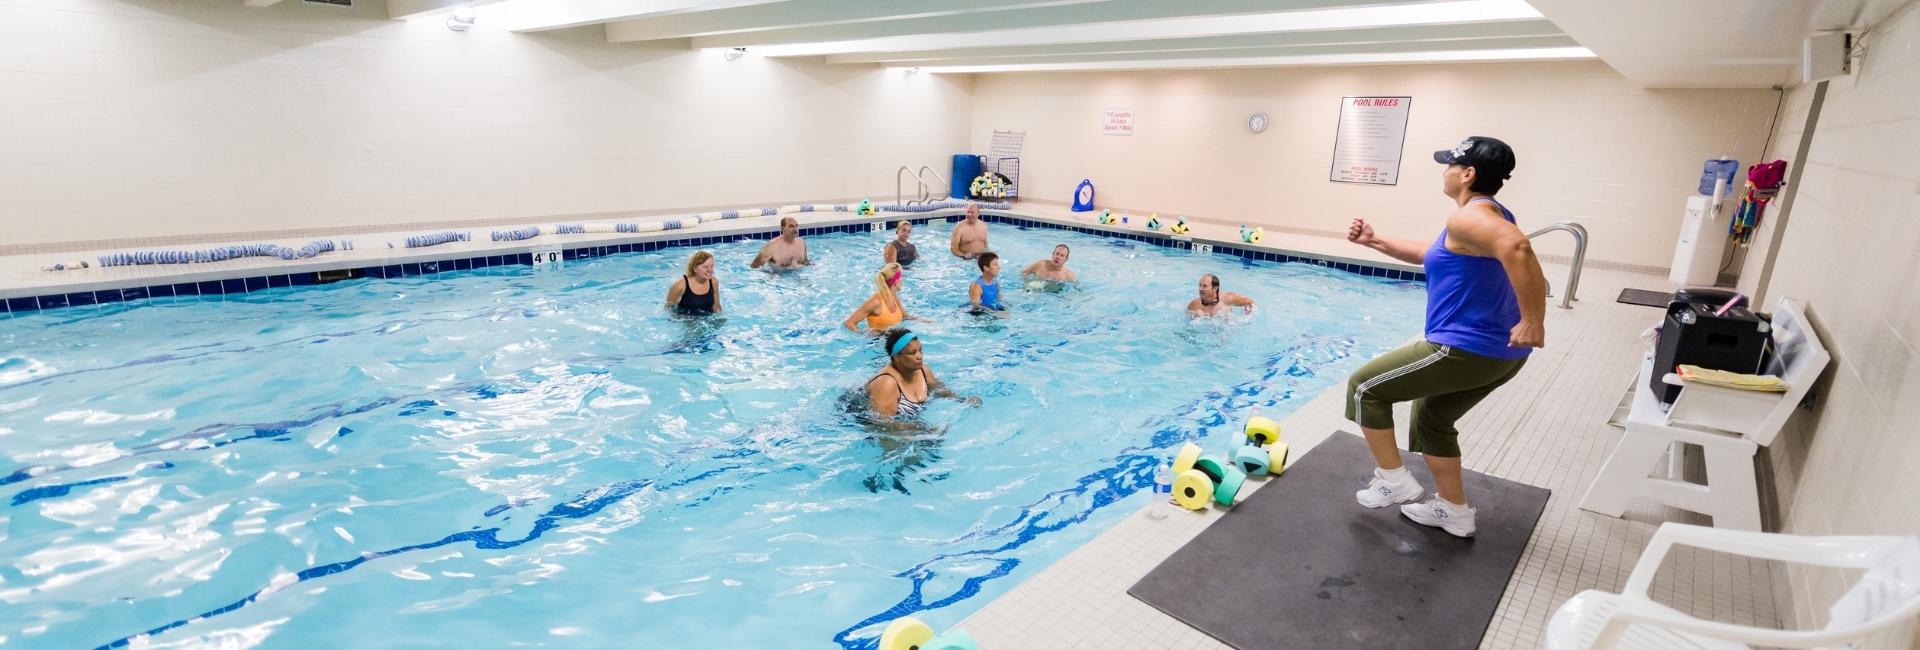 pool exercise class